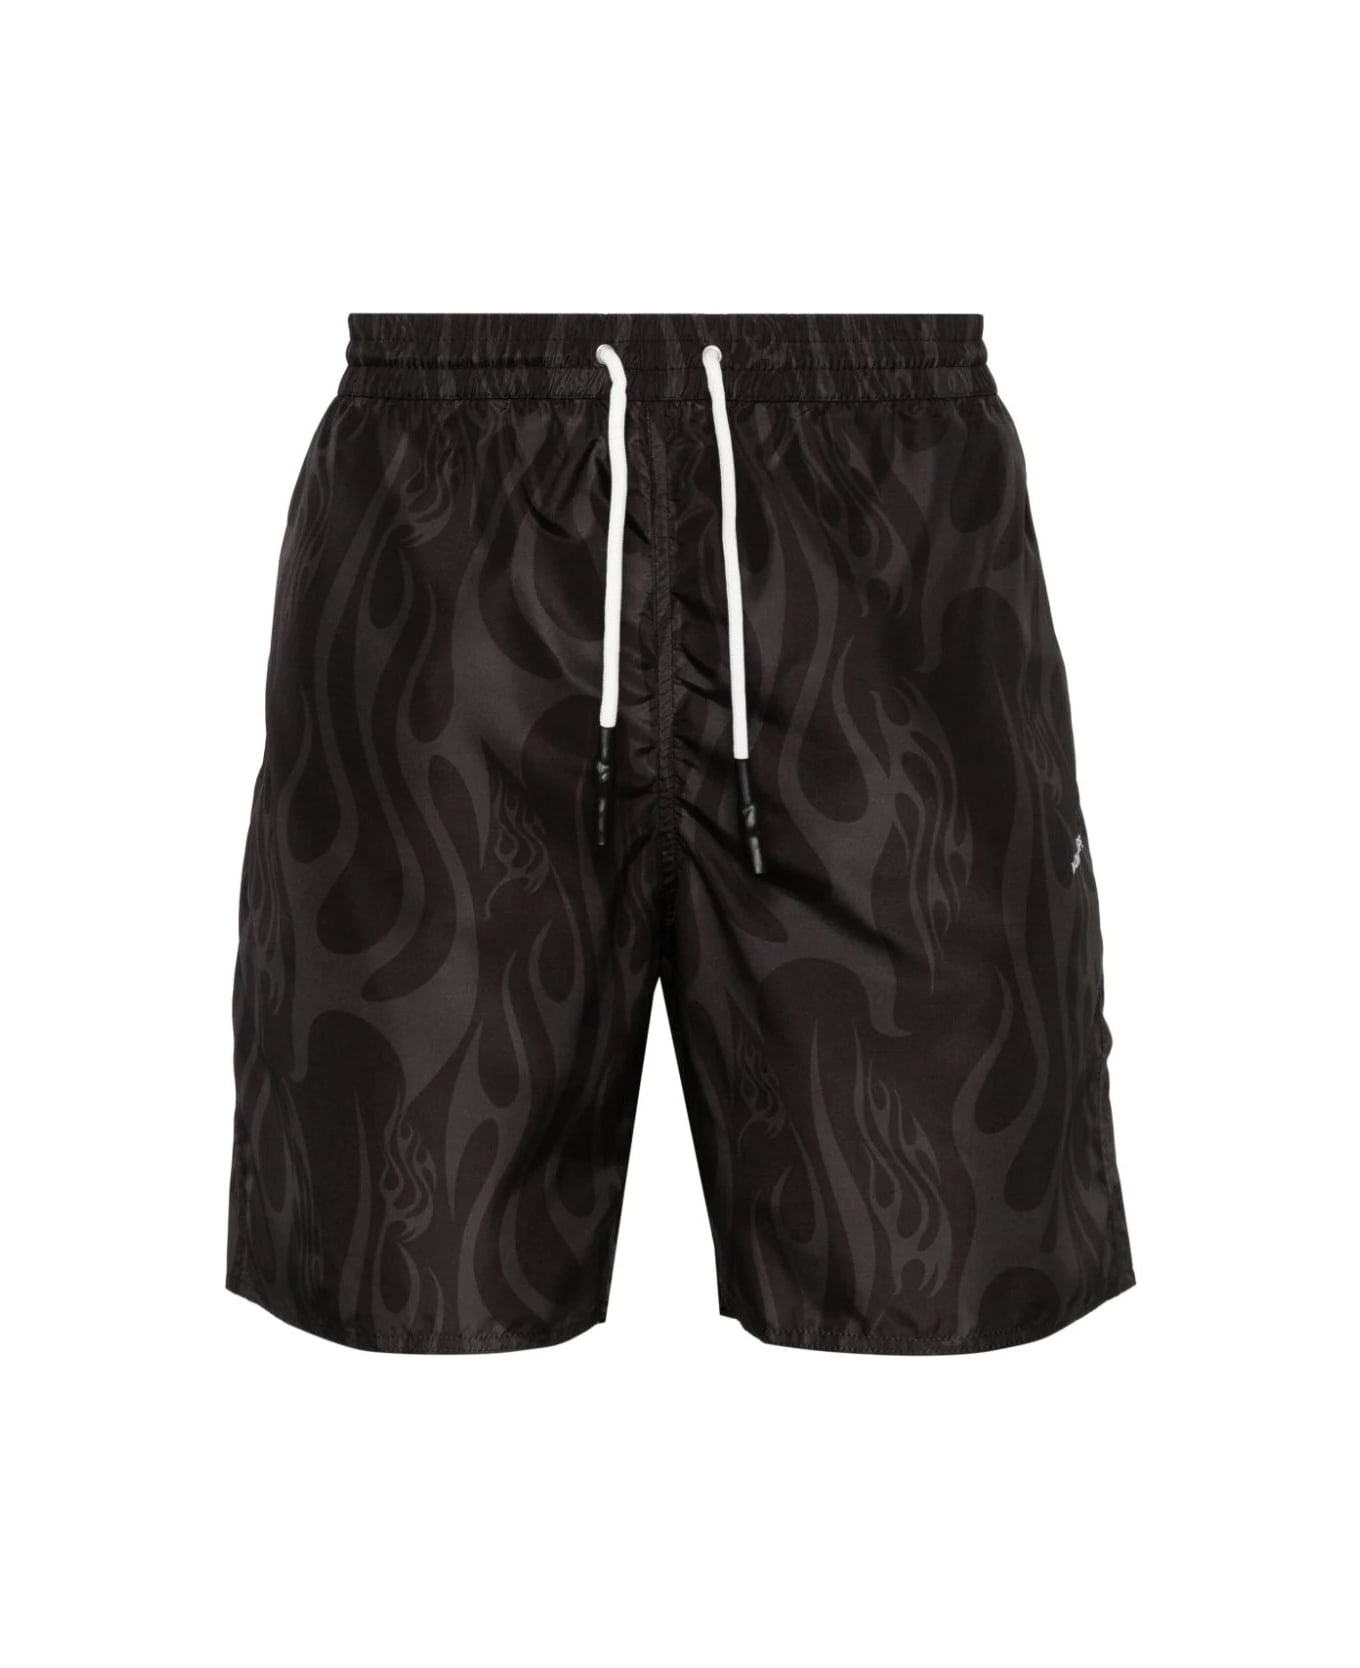 Vision of Super Black Swimwear With All-over Flames - Black